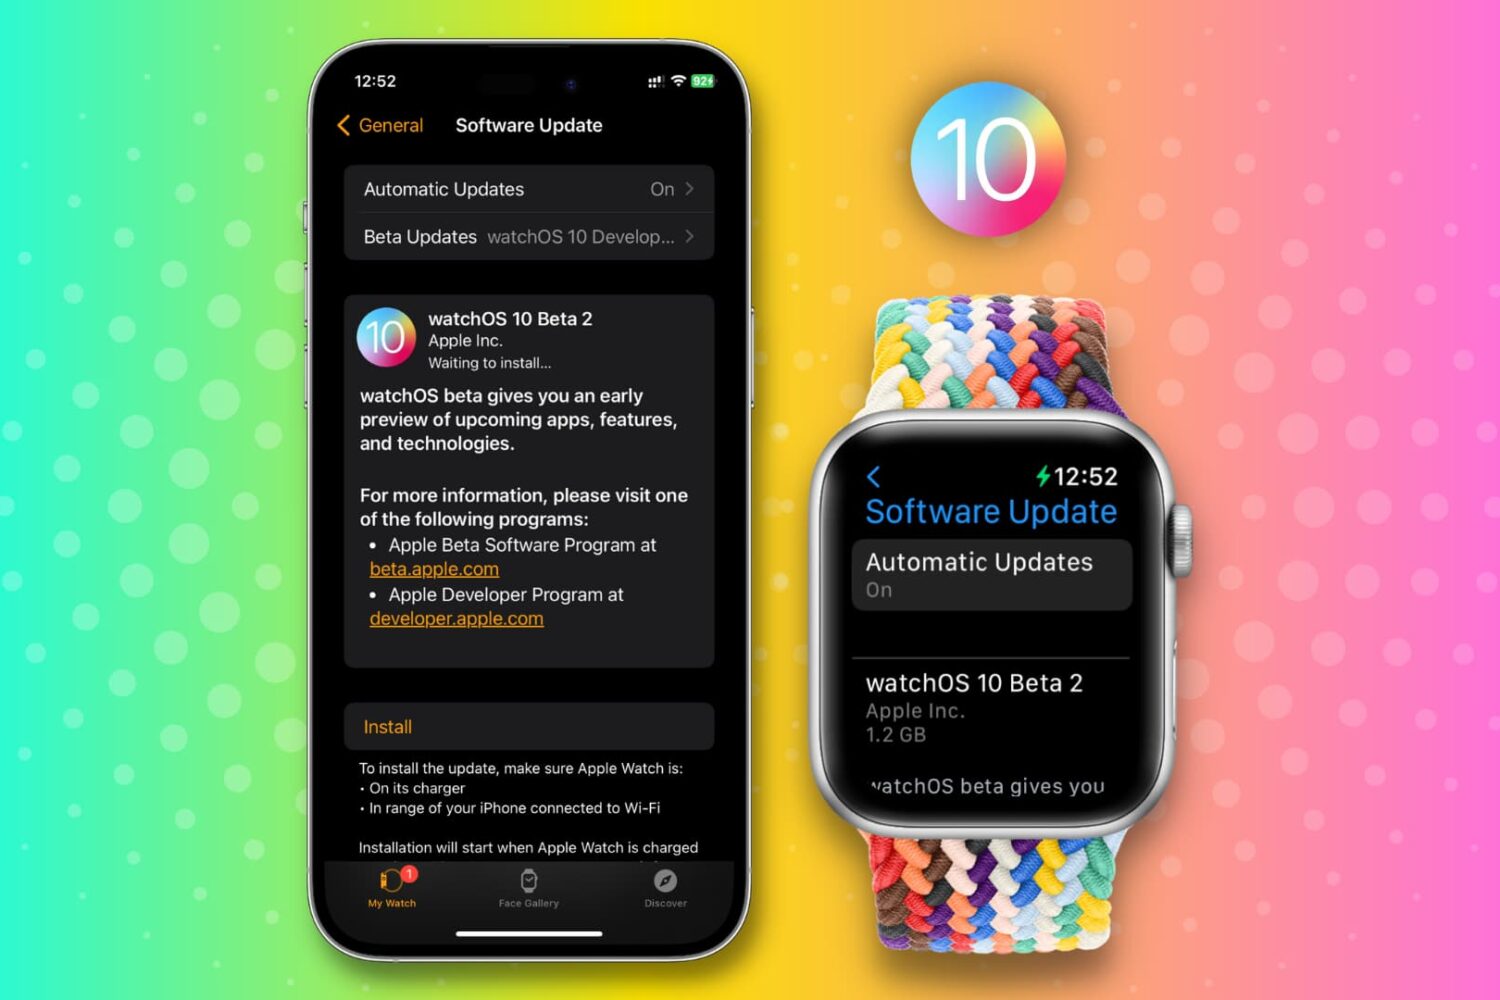 Downloading and installing watchOS 10 on Apple Watch